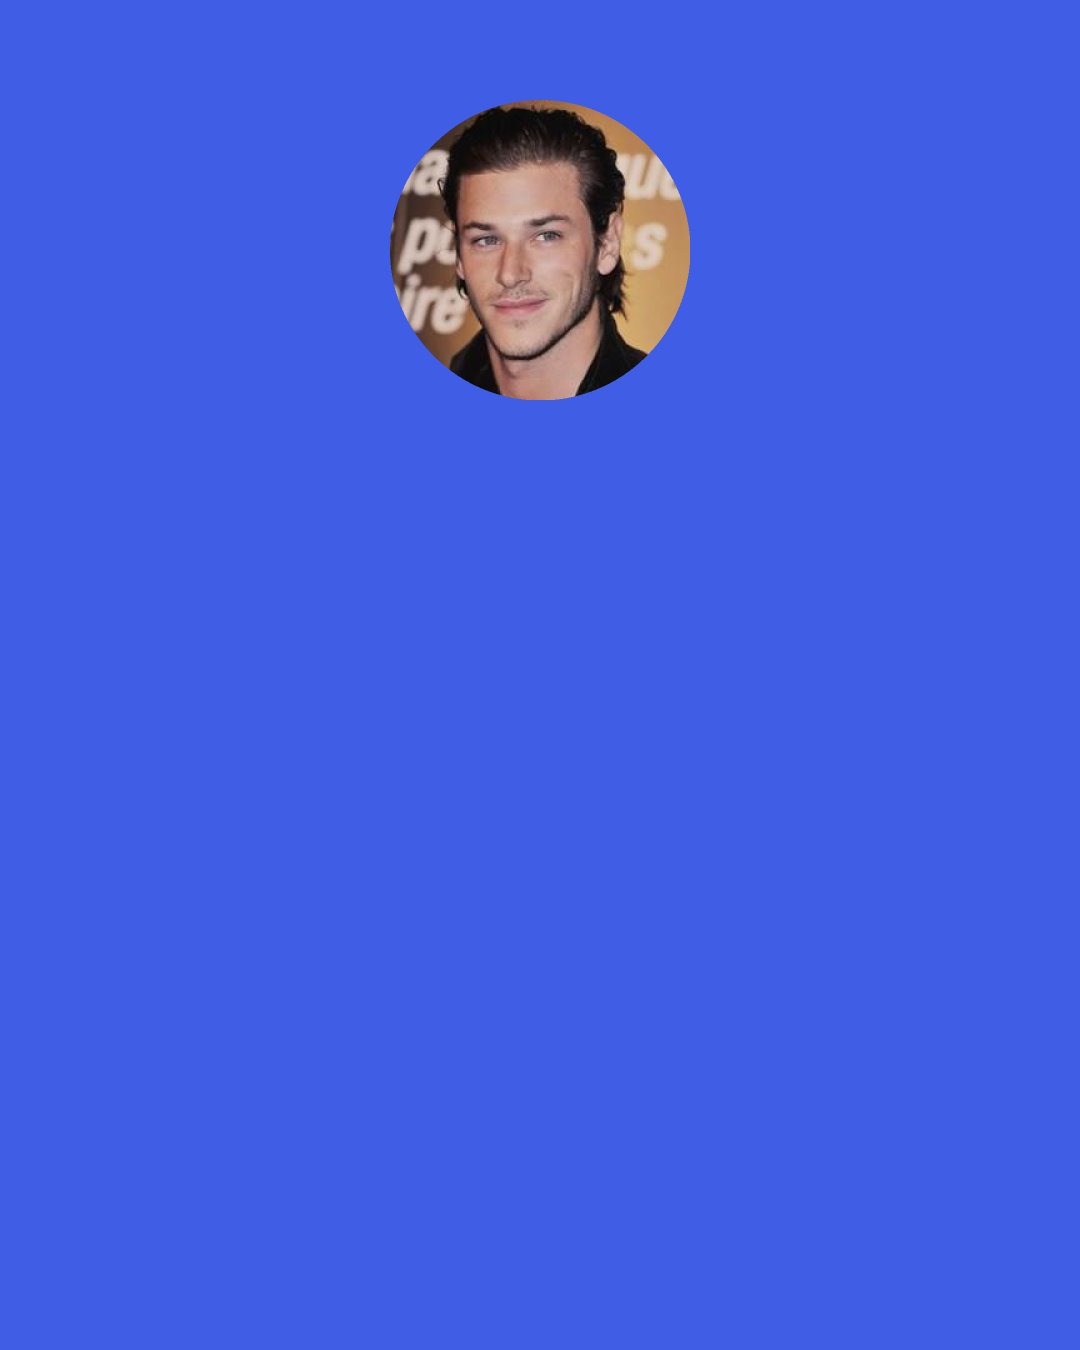 Gaspard Ulliel: I love good food. I’m an epicurean, that’s for sure. … But I am not really a good cook.